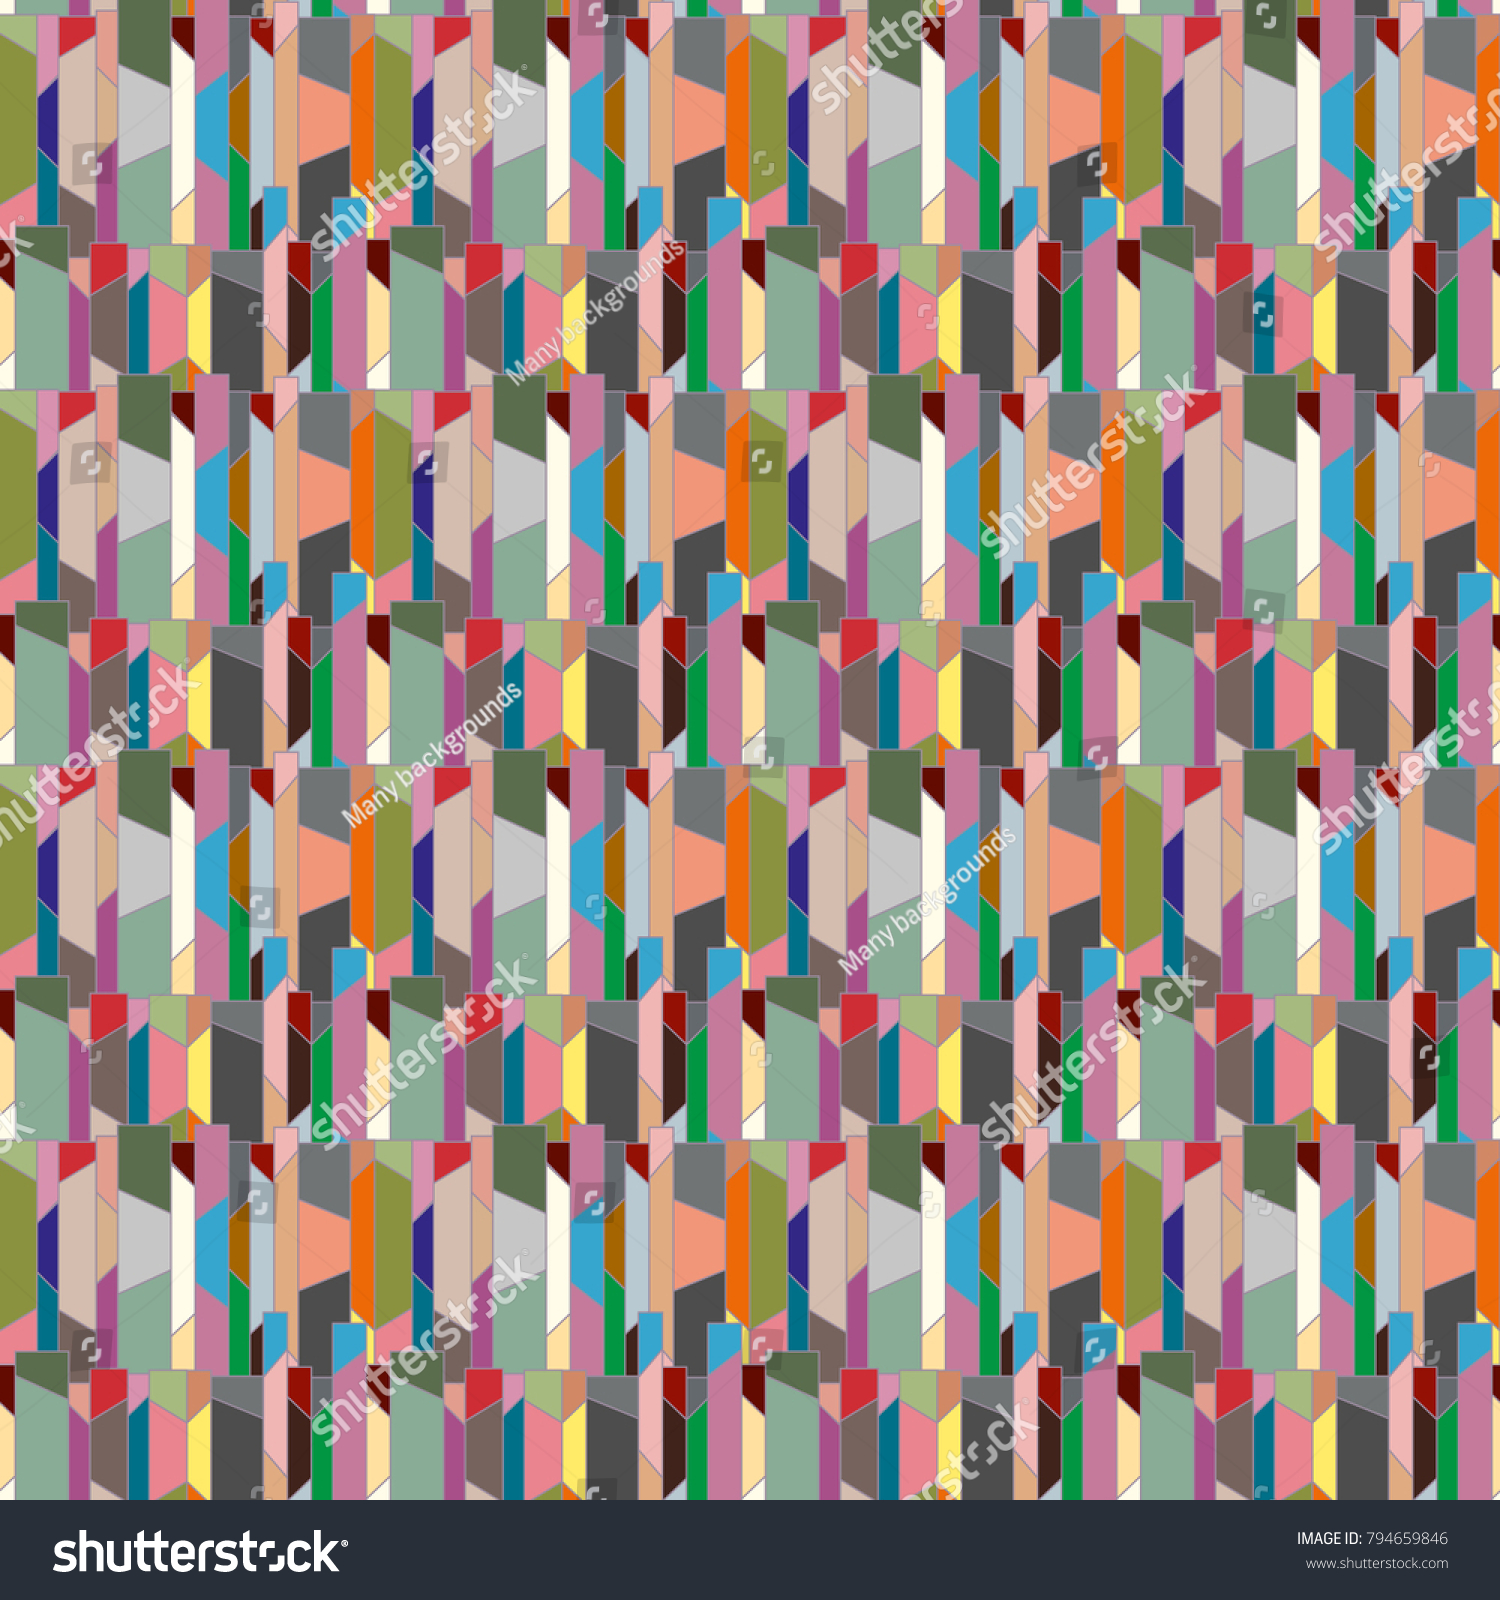 Abstract color seamless pattern for new background. #794659846